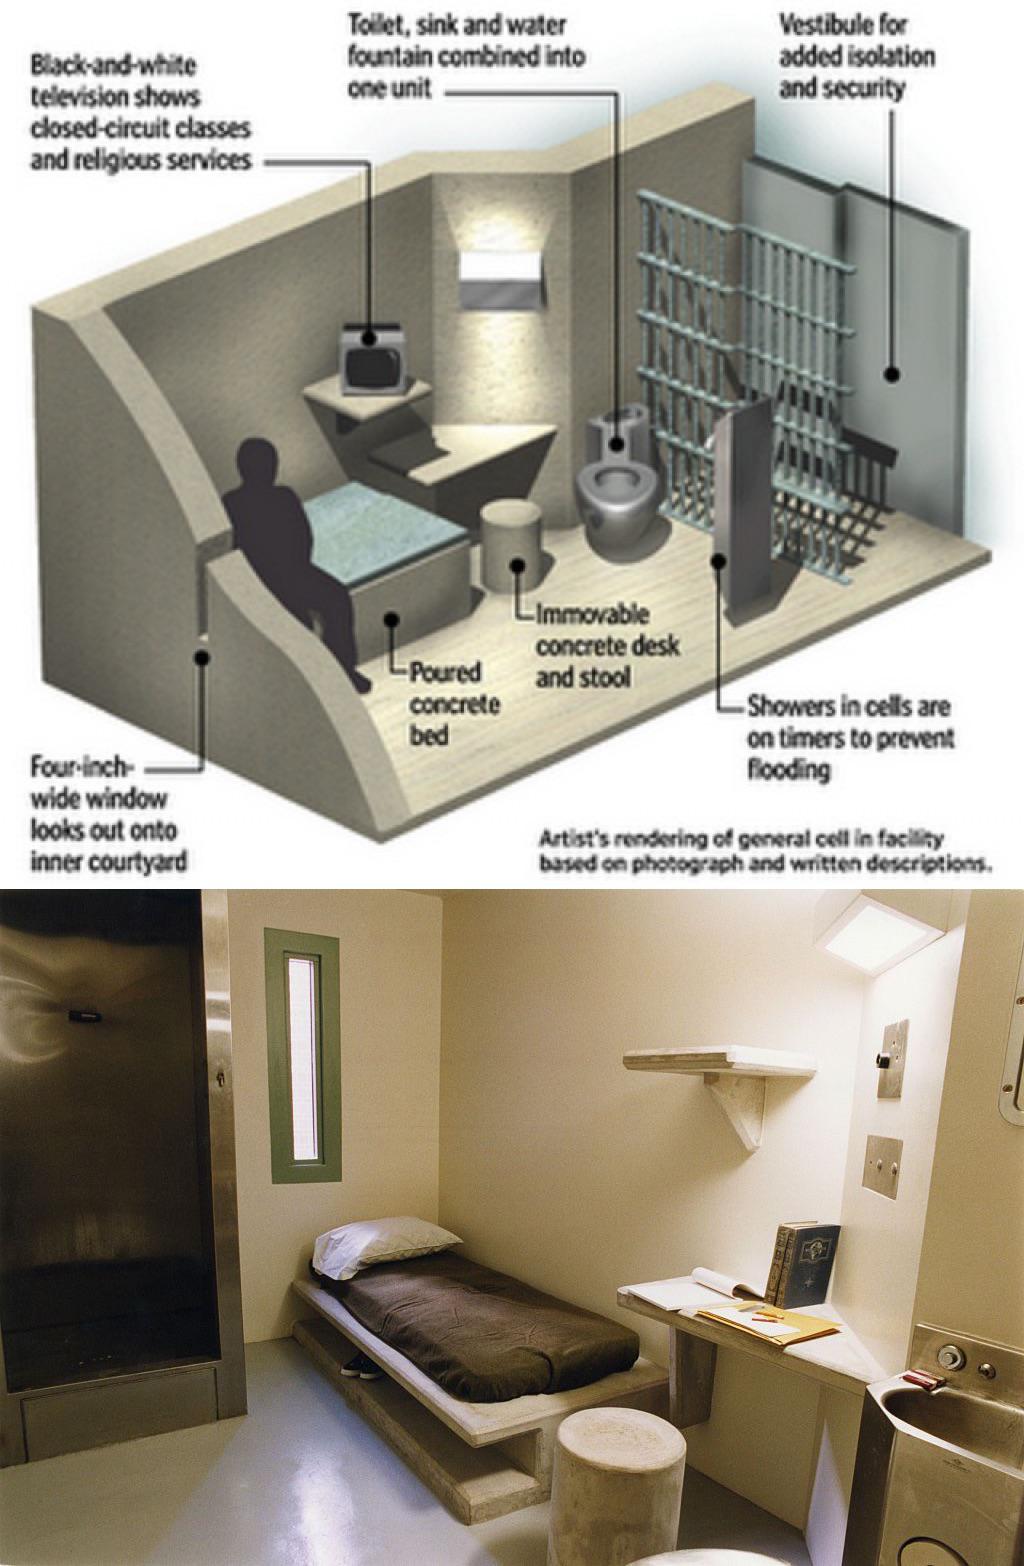 The U.S. Supermax Penitentiary in Florence, Colorado houses some of the worst federal inmates, including those who are escape risks, have a history of assaulting or killing fellow inmates and/or guards, and high-profile terrorists and crime lords. This is